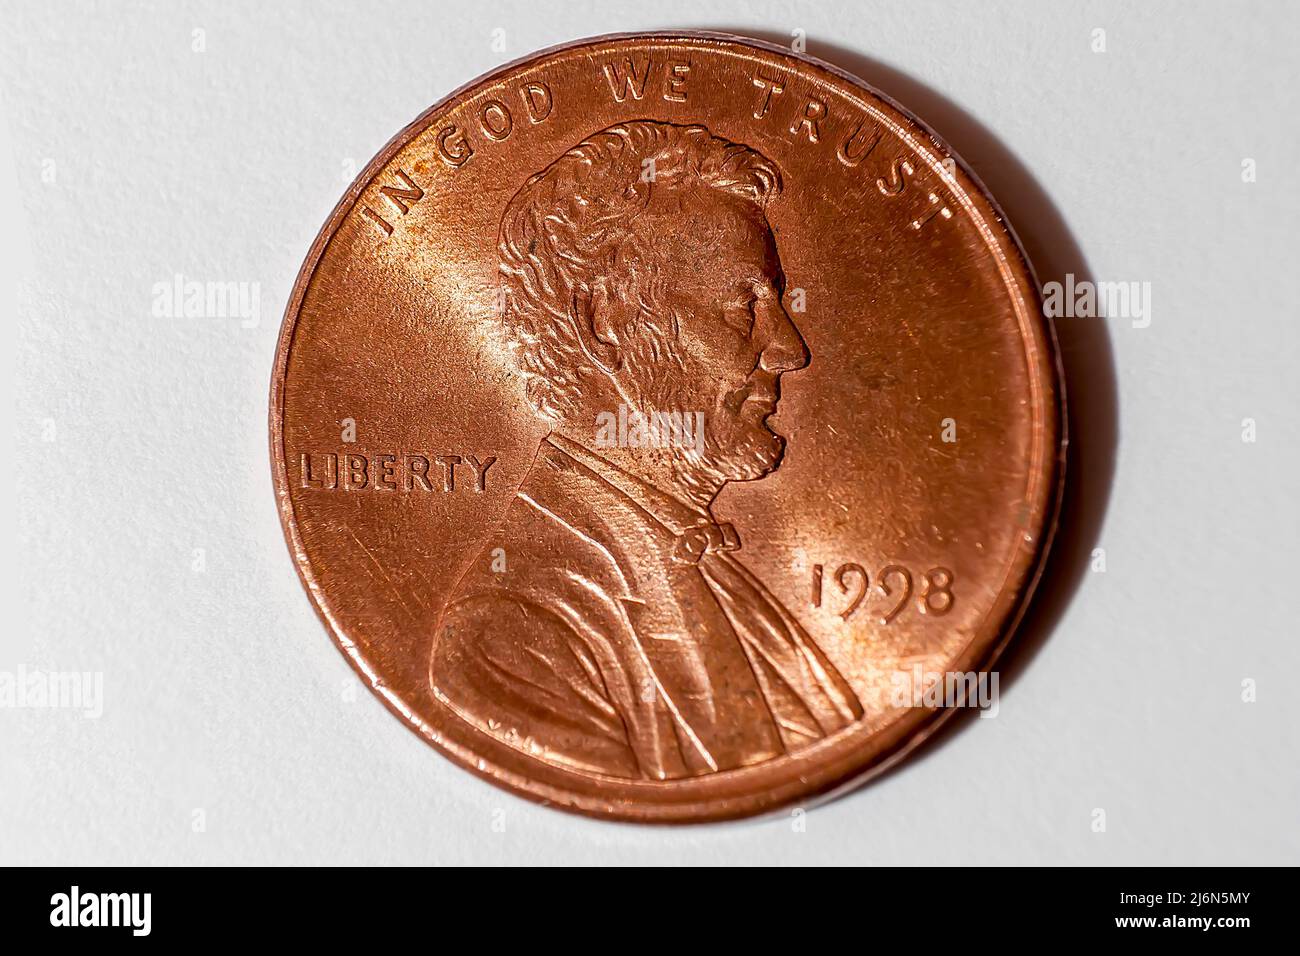 1998 one cent united states of america legal tender copper plated zinc alloy coin minted by Abraham Lincoln. Stock Photo